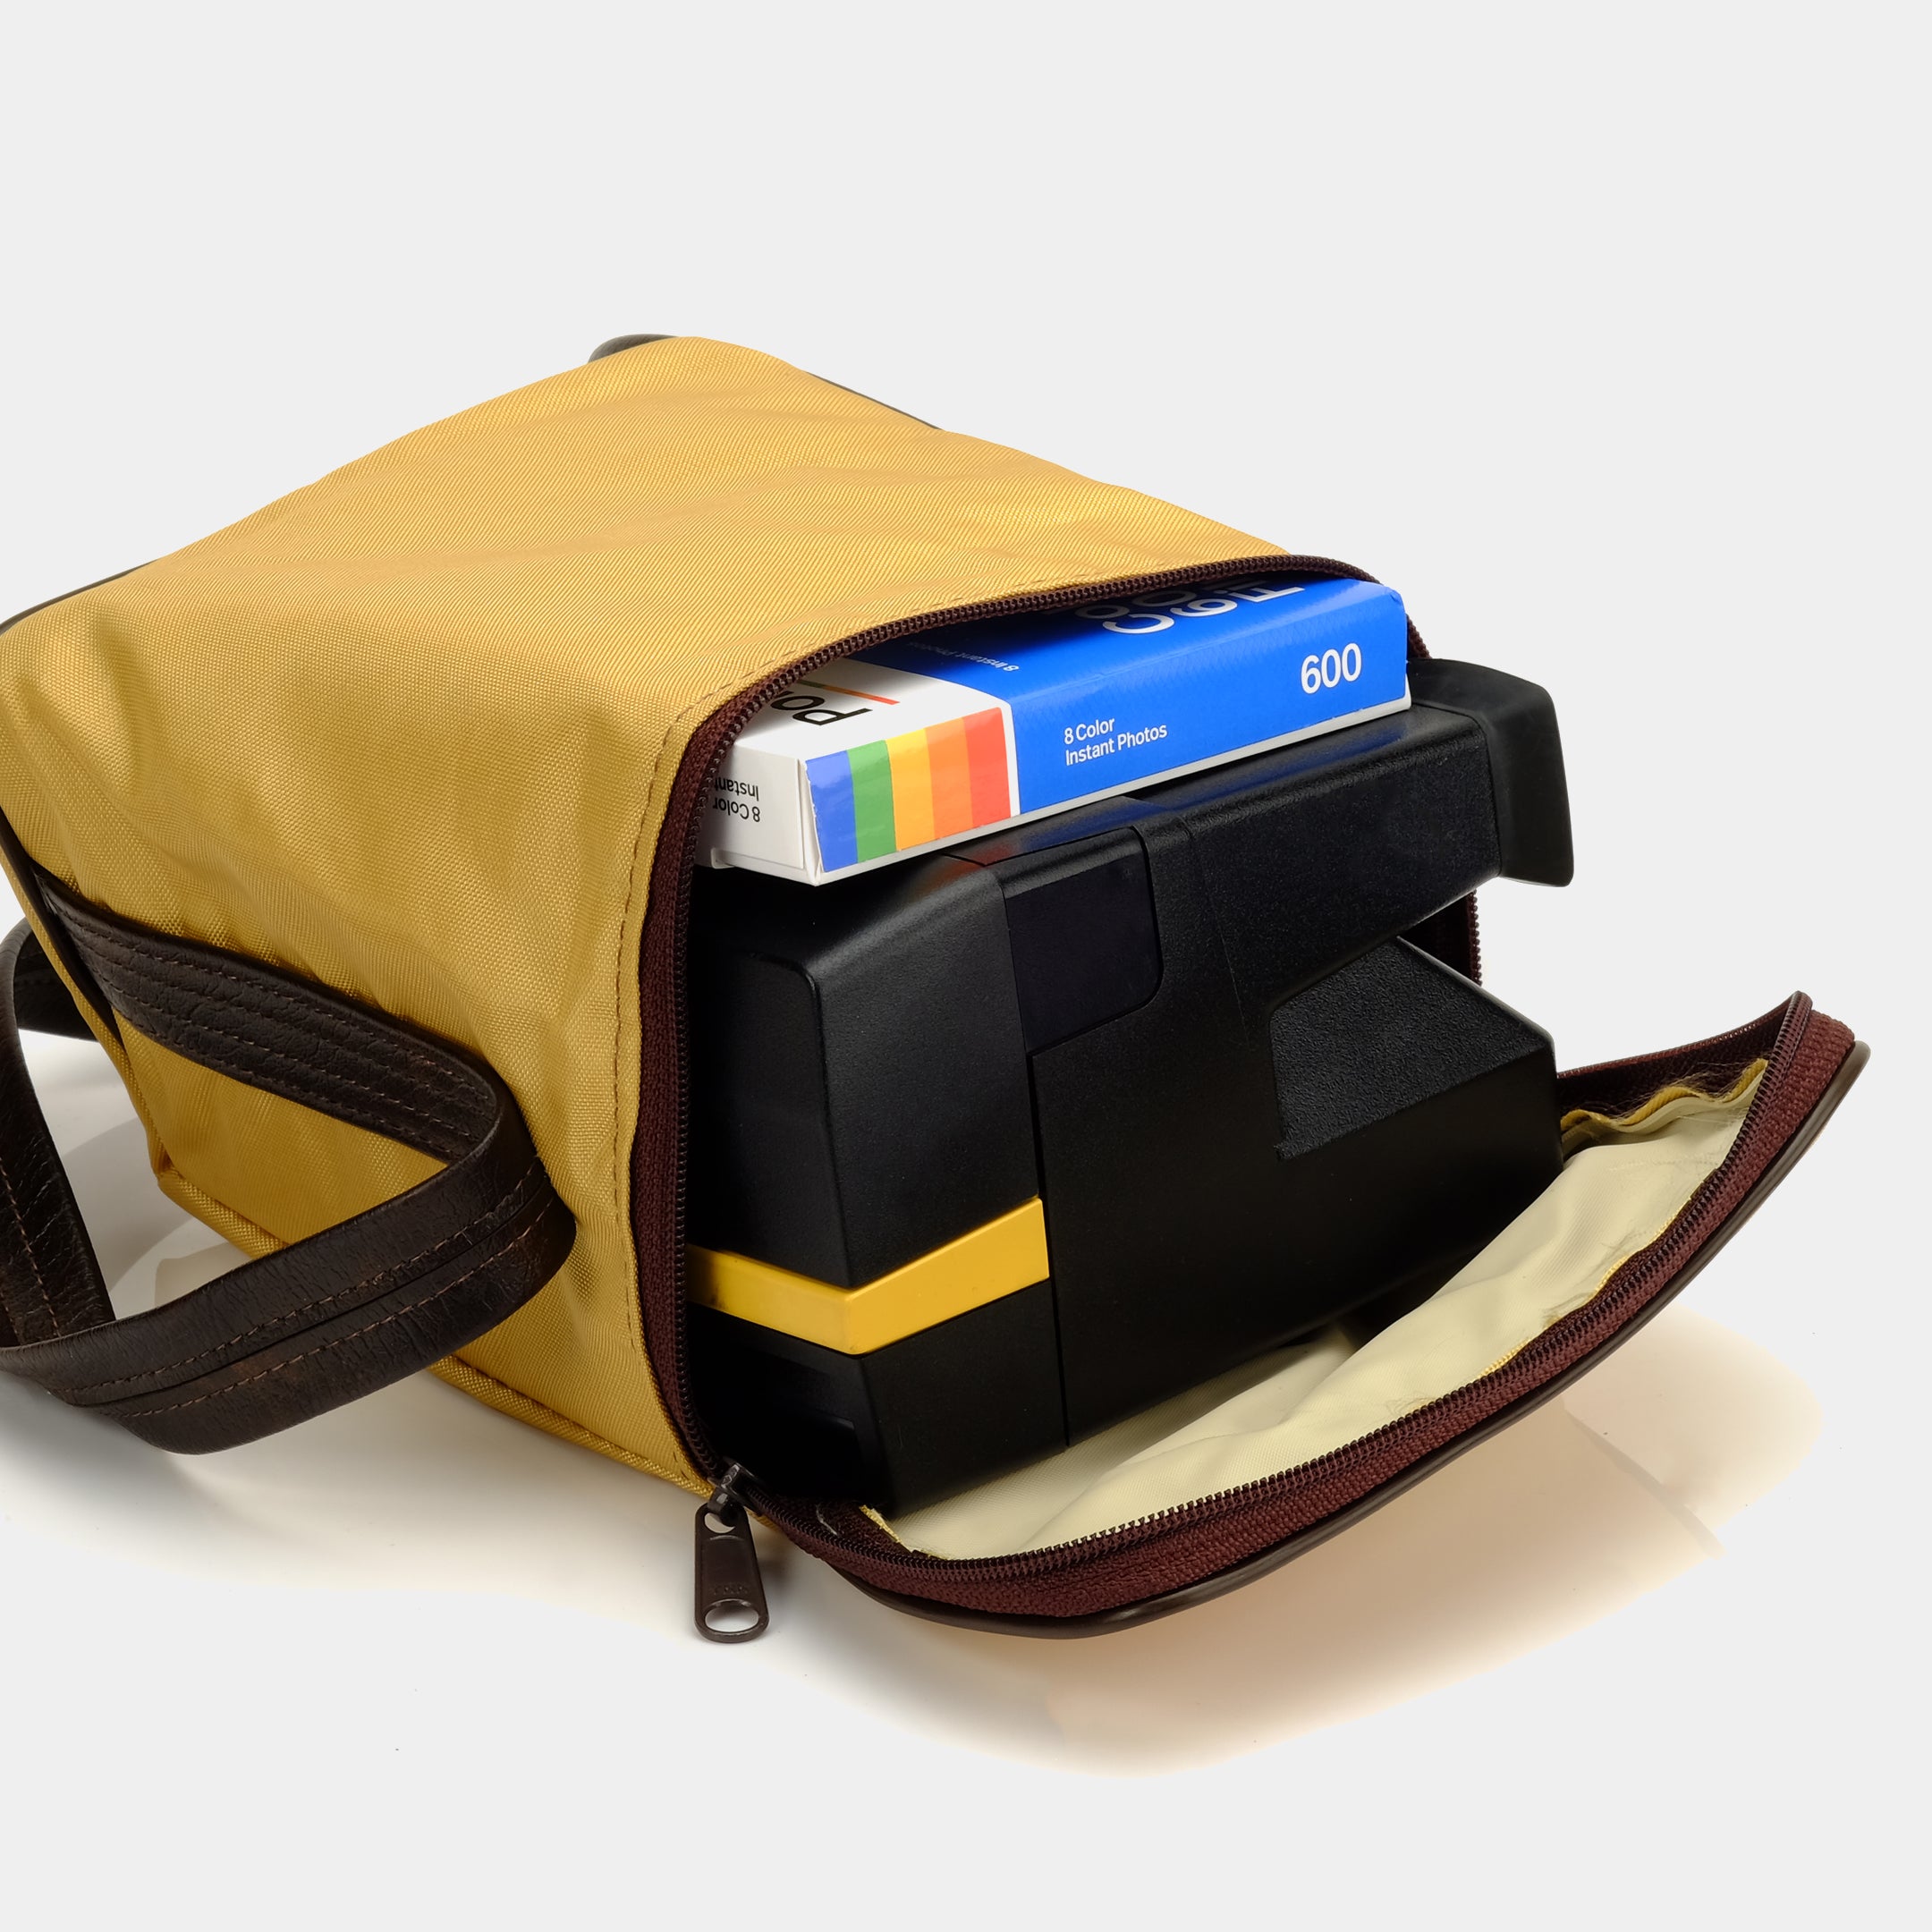 Polaroid Gold "Check This Out" Canvas Instant Camera Bag